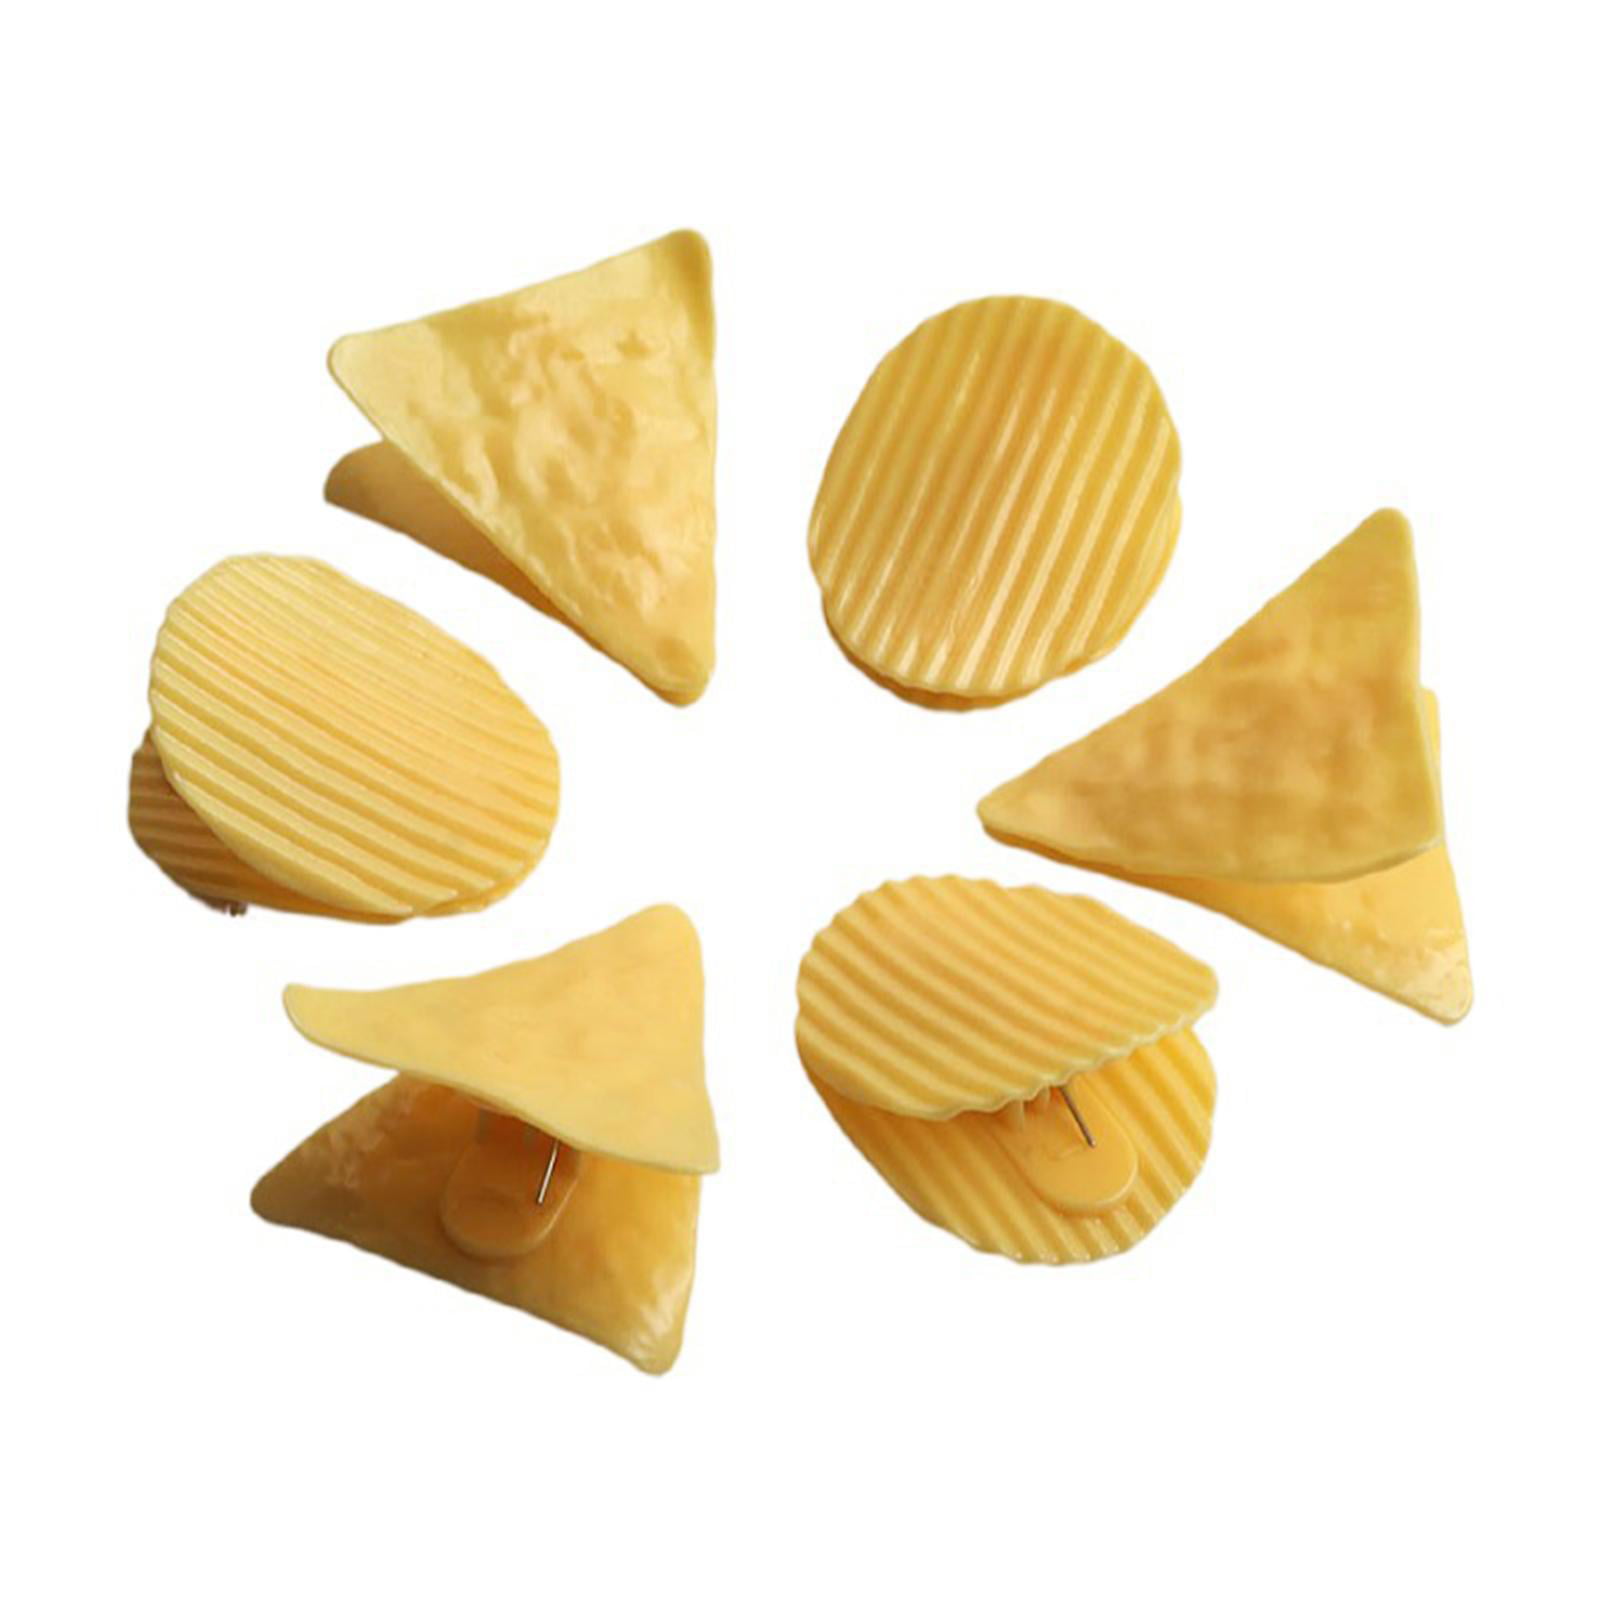 6pcs Chip Bag Clips Dog Cat Multi Purpose Clips Food Snack Bread Clips New